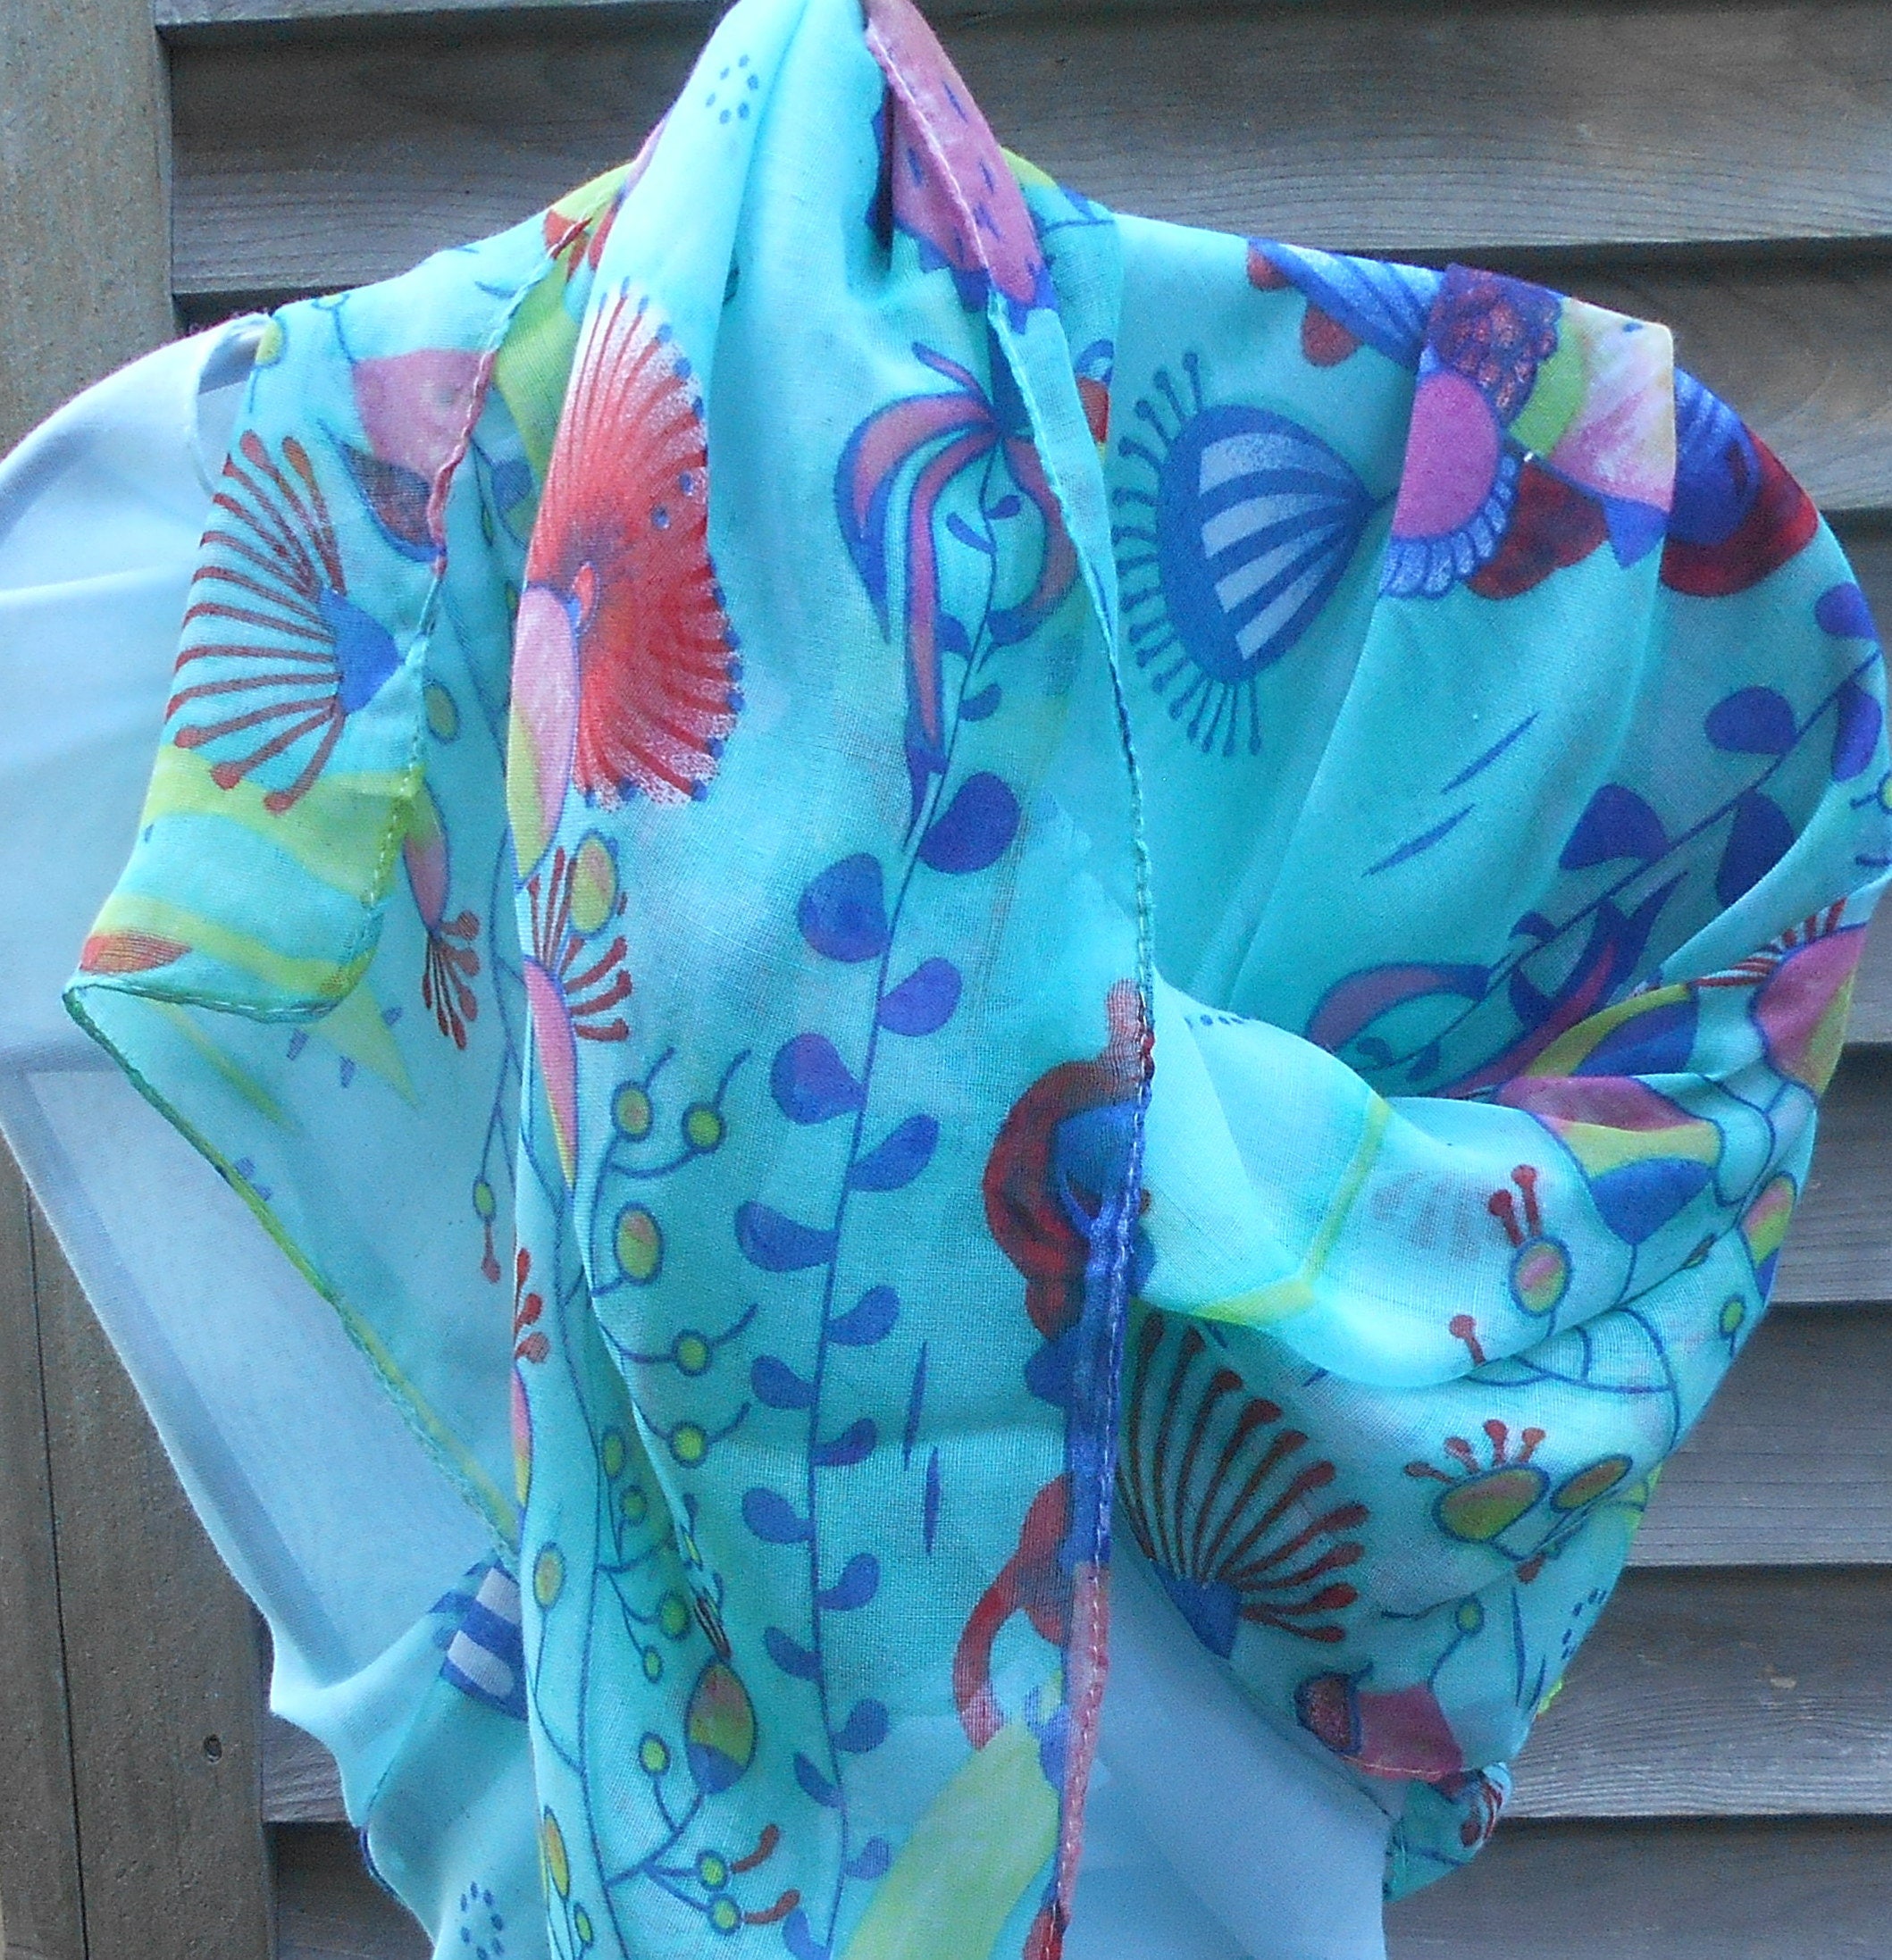 Festival Scarf,Fish Scarf,Turquoise Fashion Scarf,Scarf with Fish